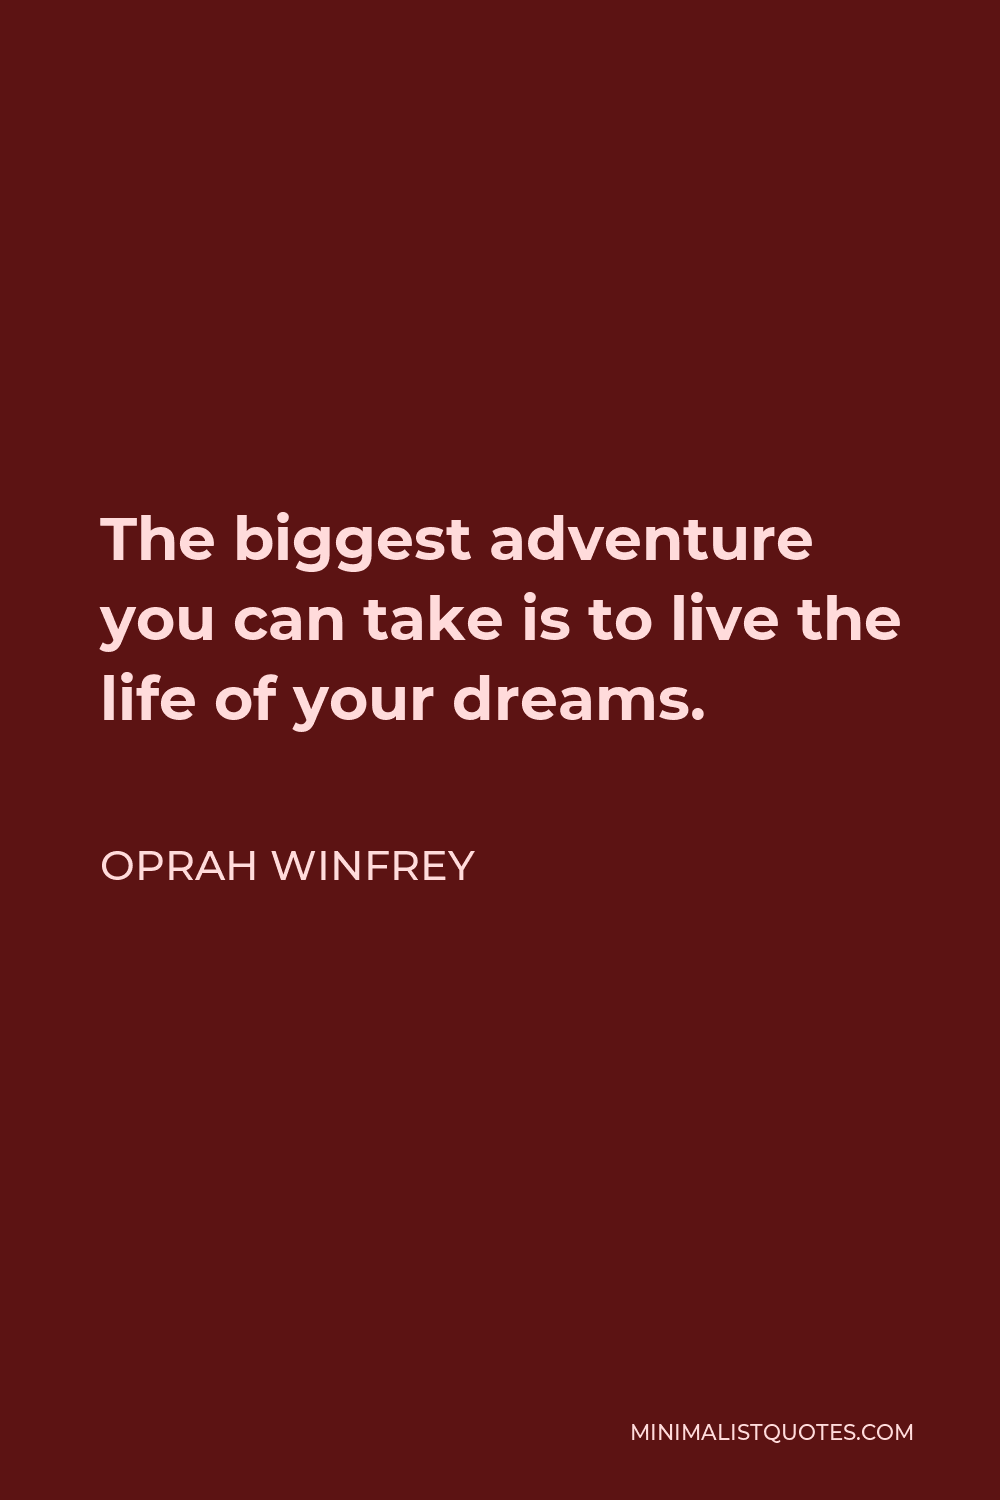 Oprah Winfrey Quote - The biggest adventure you can take is to live the life of your dreams.